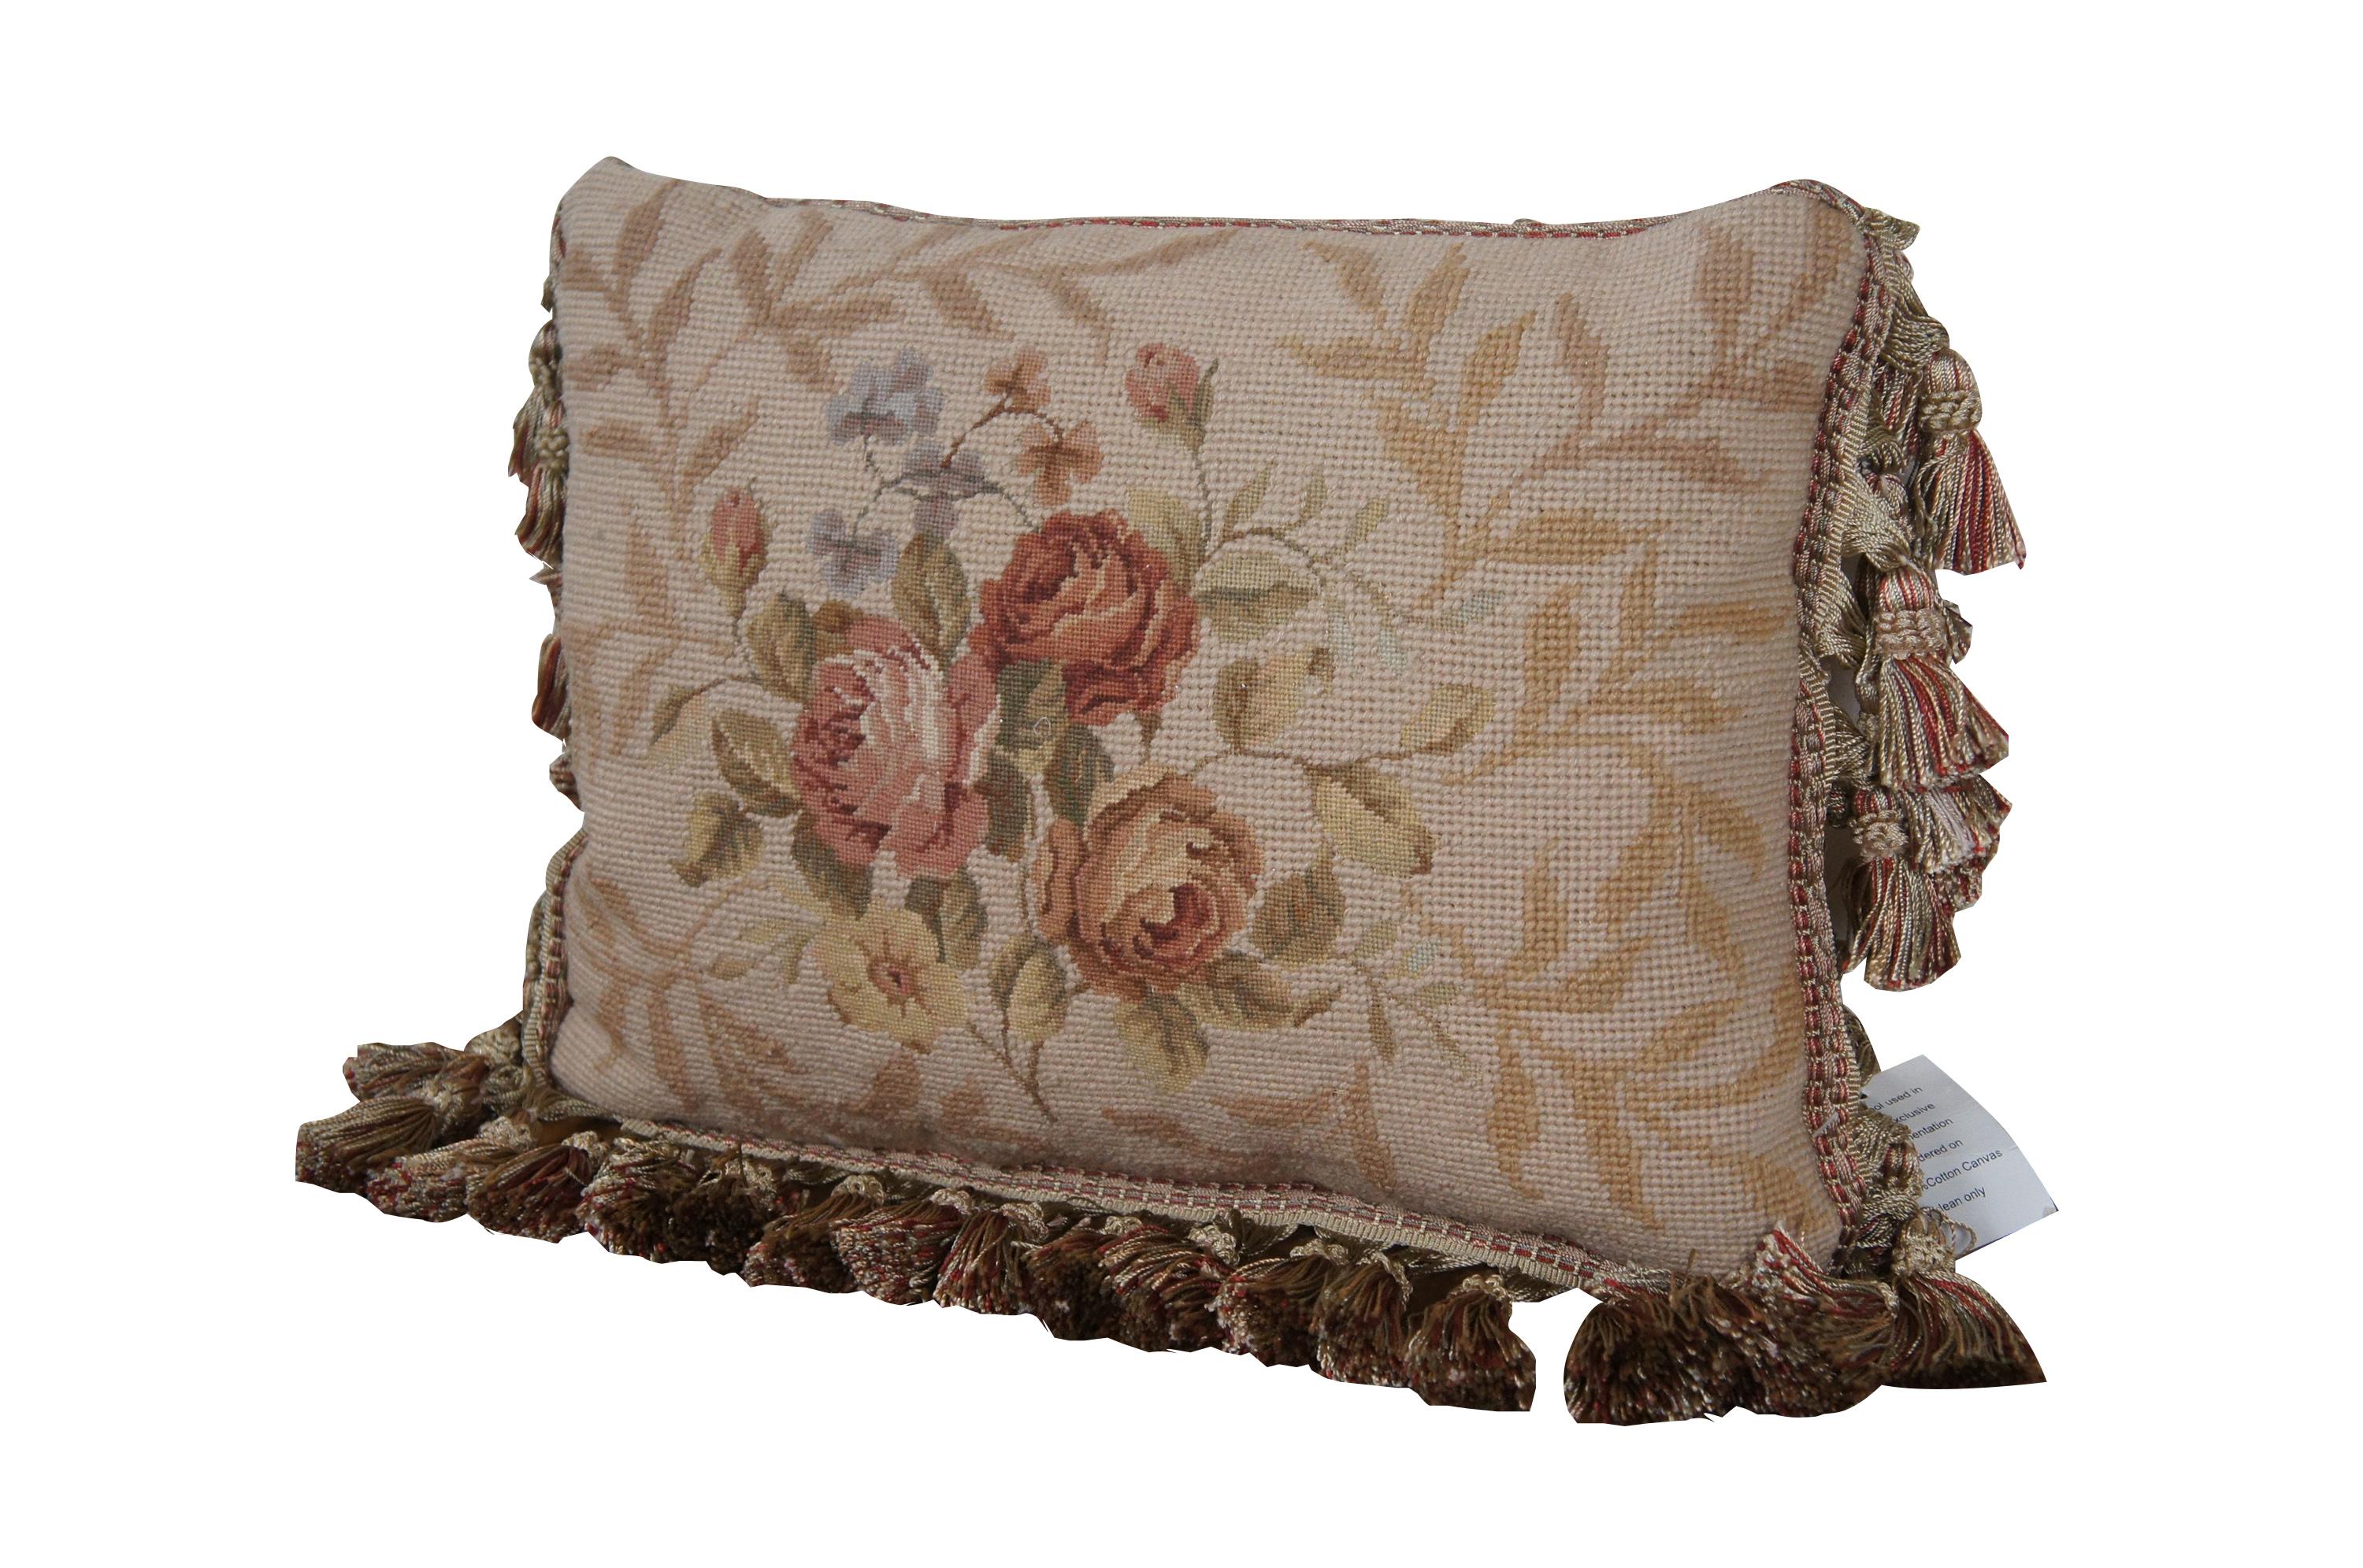 20th century rectangular needlepoint lumbar / throw pillow, hand embroidered in wool with a bouquet of pink, rust, yellow, and blue roses / flowers on a backdrop of beige leaves. Beige and red tassel trim. Beige velour back with zipper closure. Down